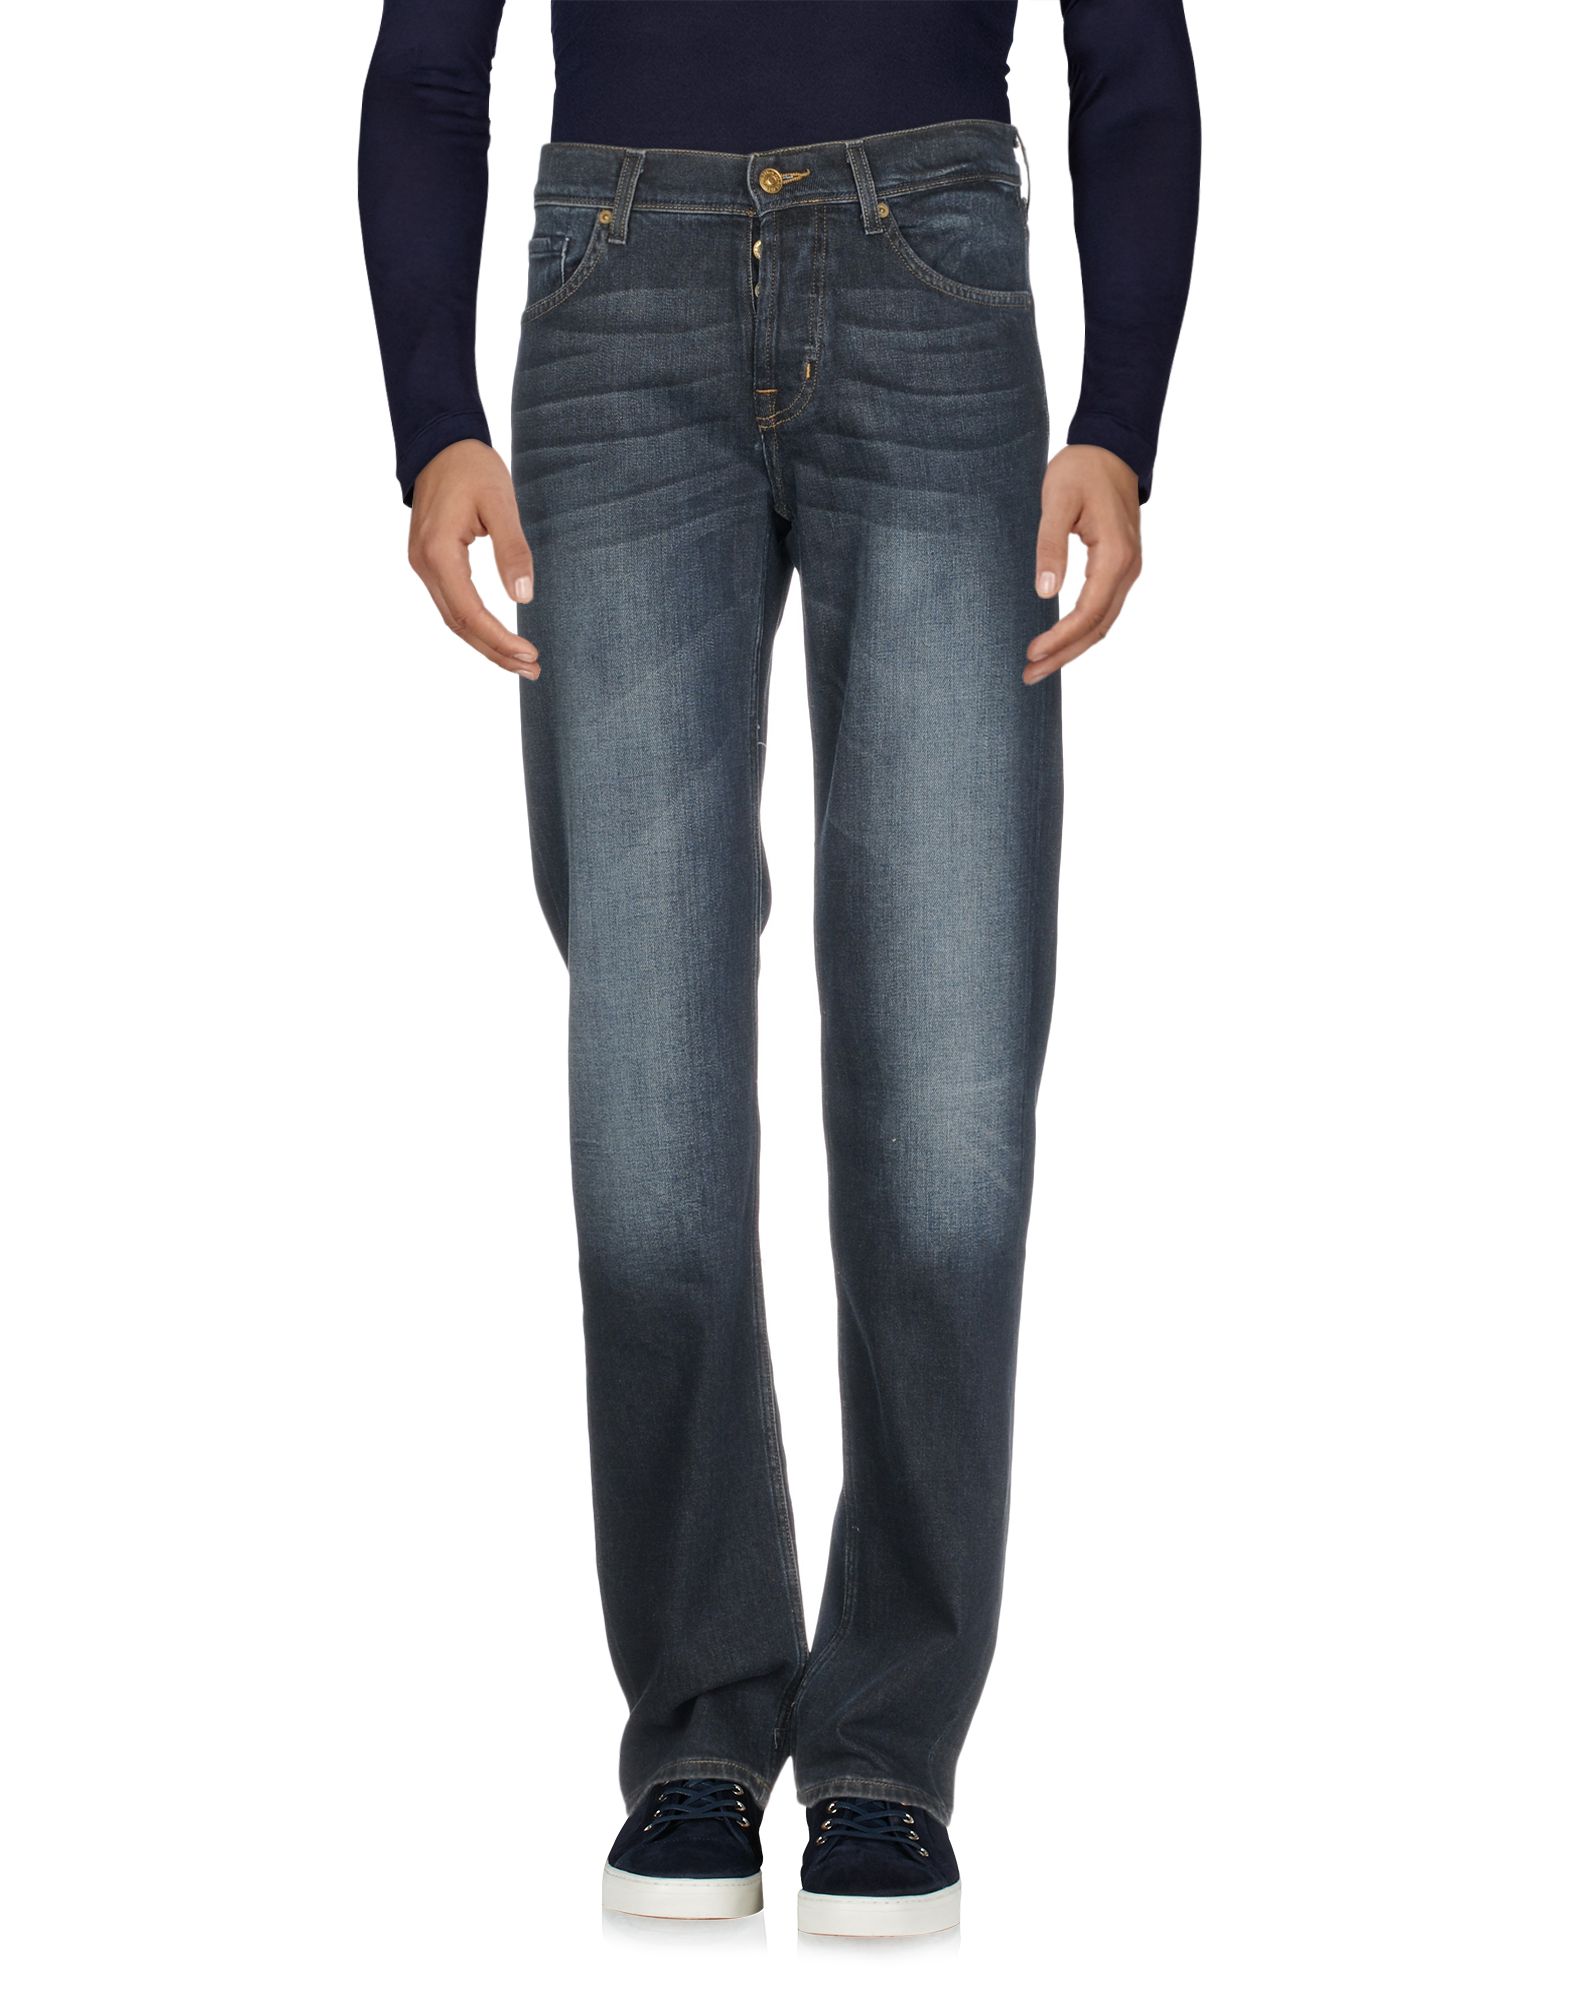 7 FOR ALL MANKIND Denim pants,42674939GQ 4